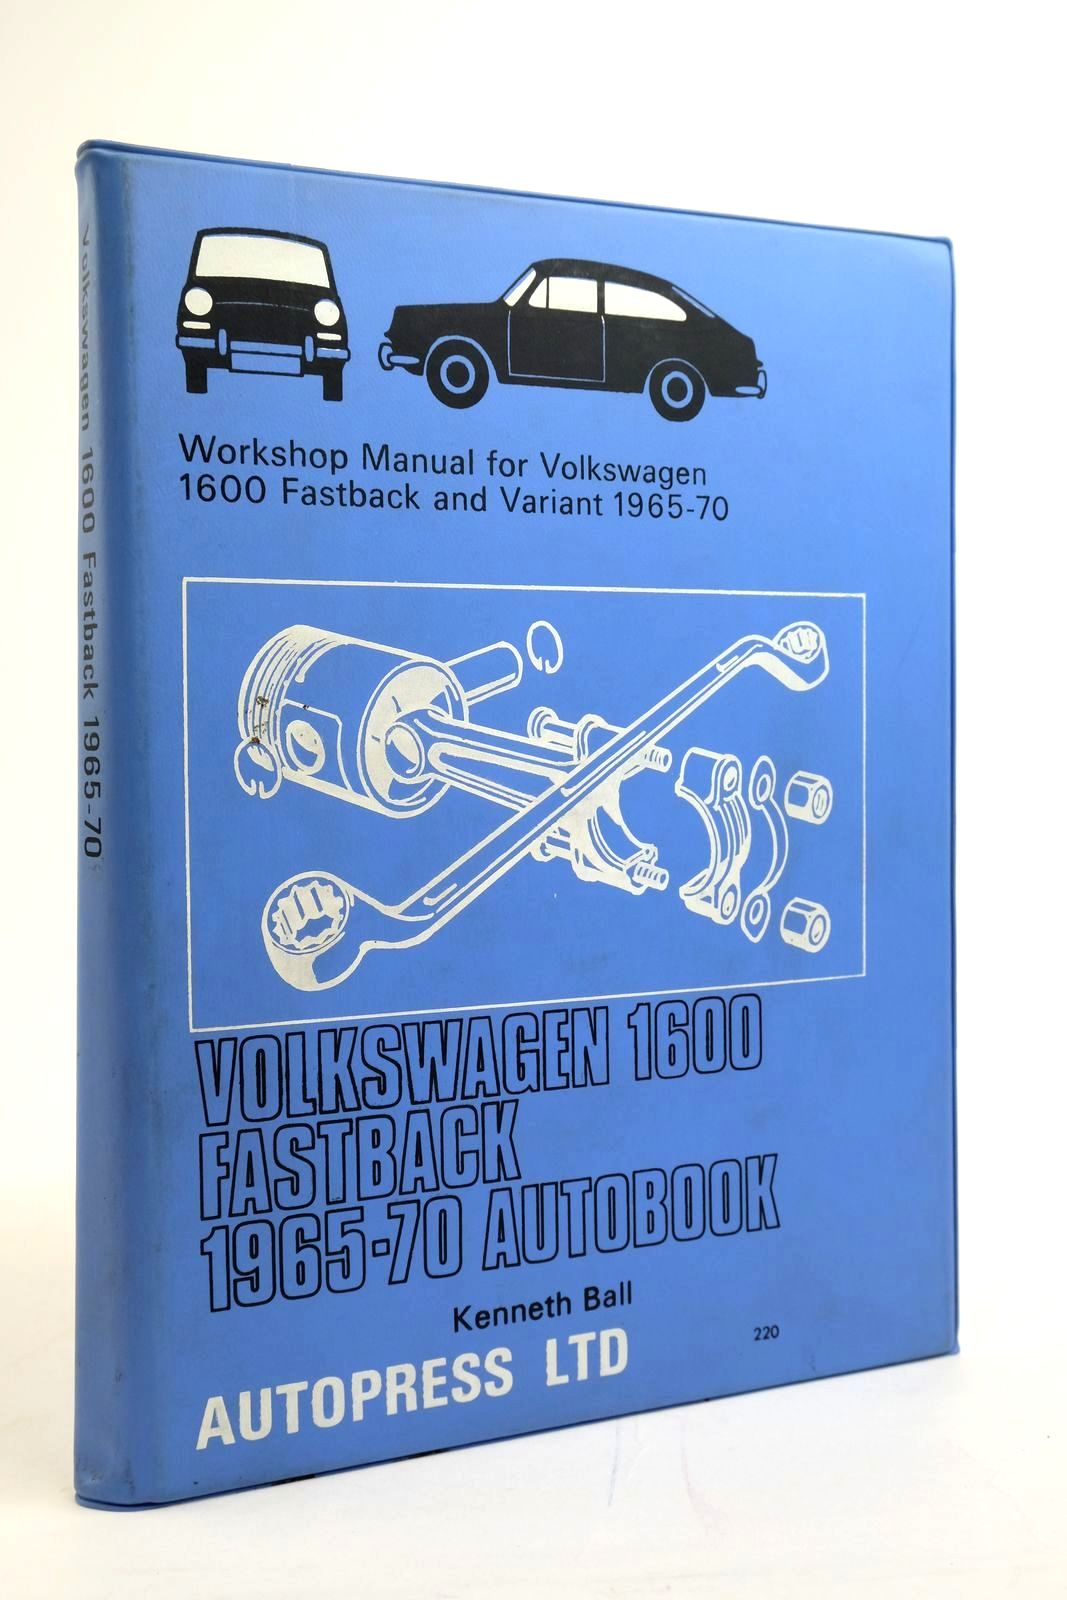 Photo of VOLKSWAGEN 1600 FASTBACK 1965-70 AUTOBOOK written by Ball, Kenneth published by Autopress (STOCK CODE: 2135273)  for sale by Stella & Rose's Books